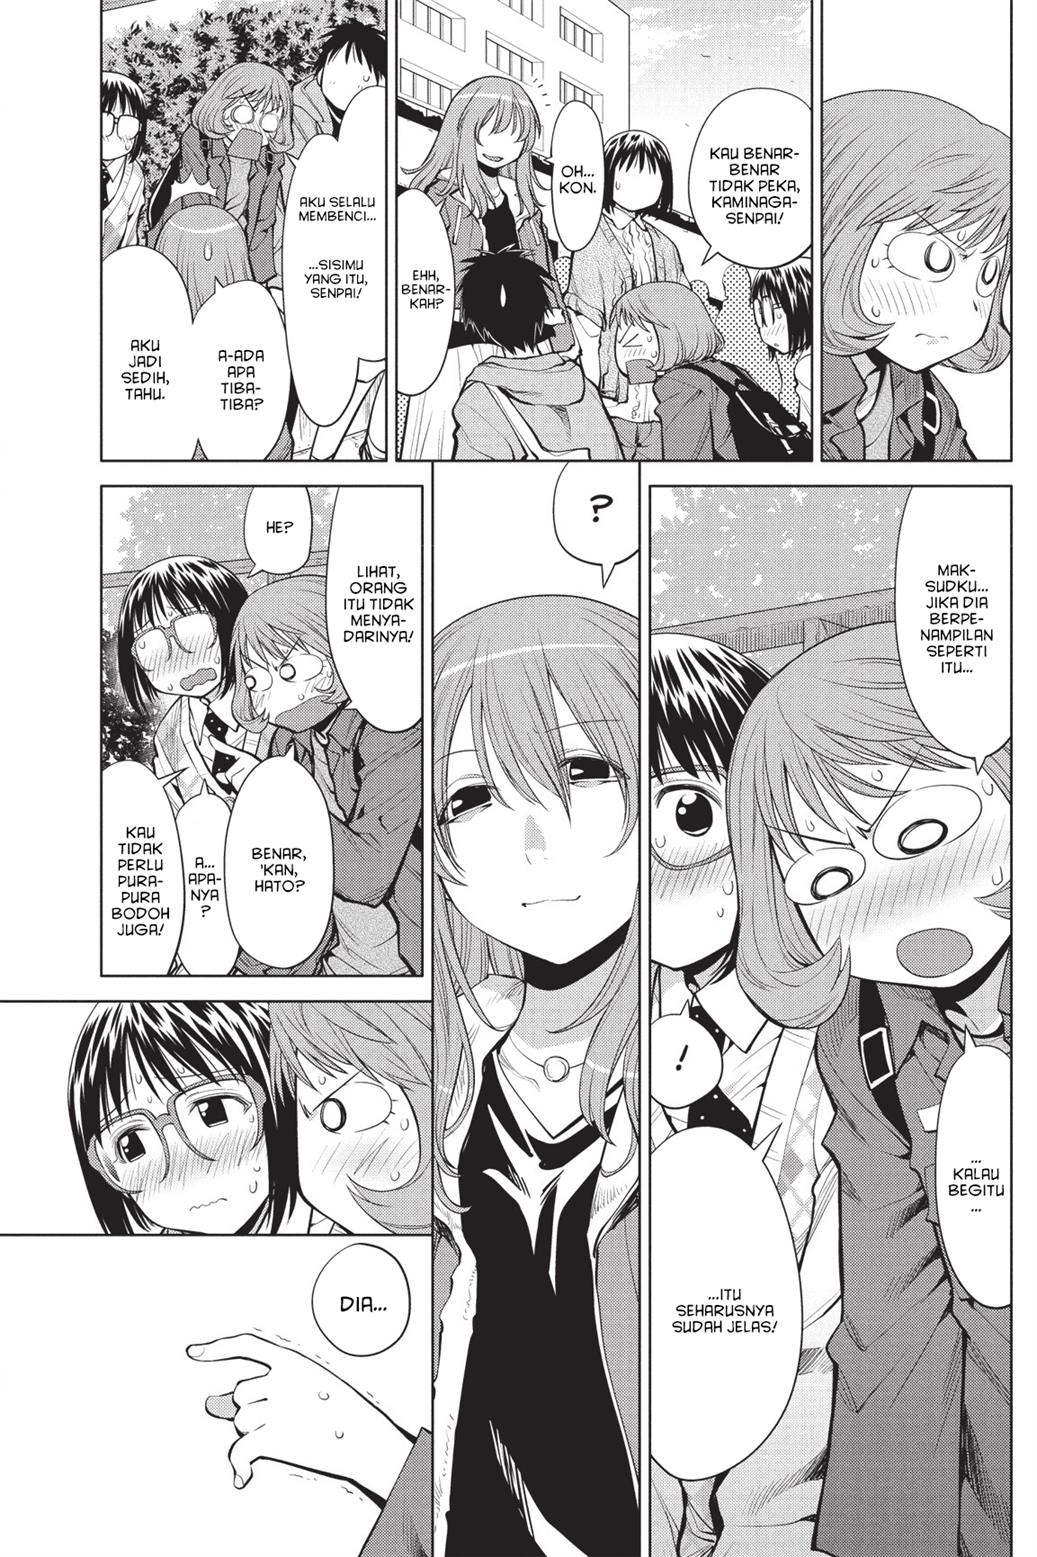 Genshiken – The Society for the Study of Modern Visual Culture Chapter 77 Image 4